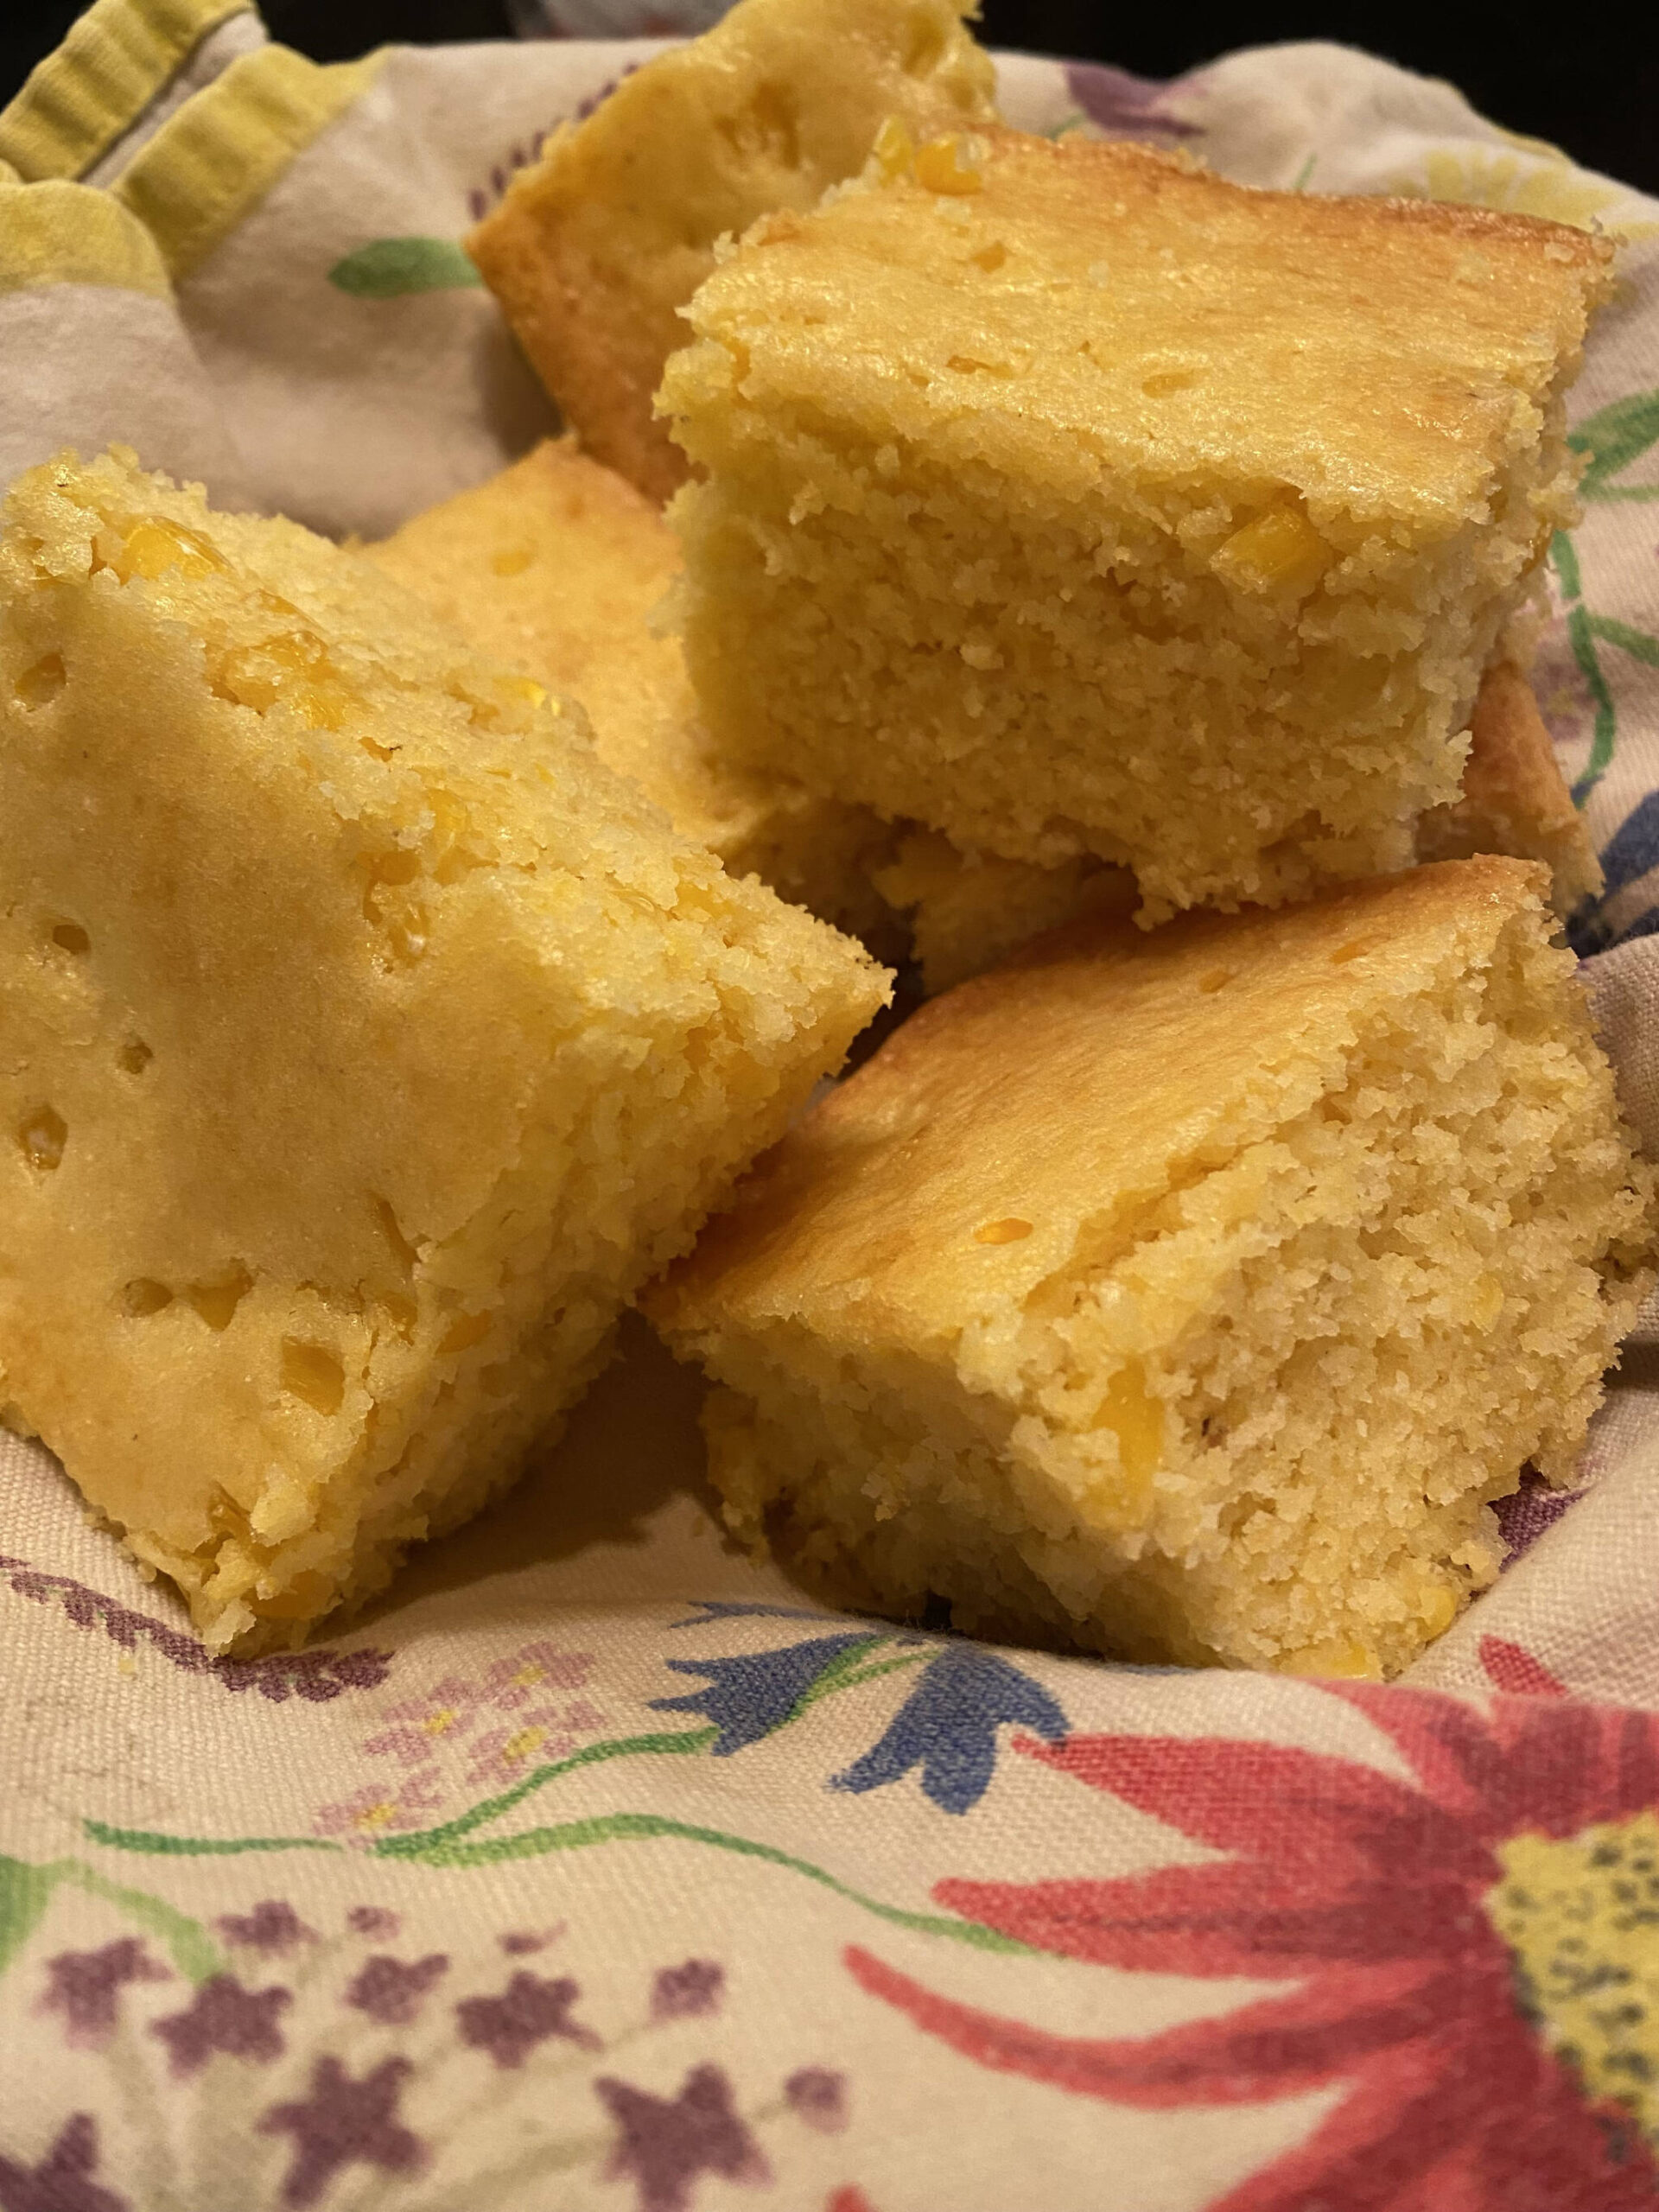 This cornbread is sweet and fluffy, perfect with chili after a long day. (Photo by Tressa Dale/Peninsula Clarion)